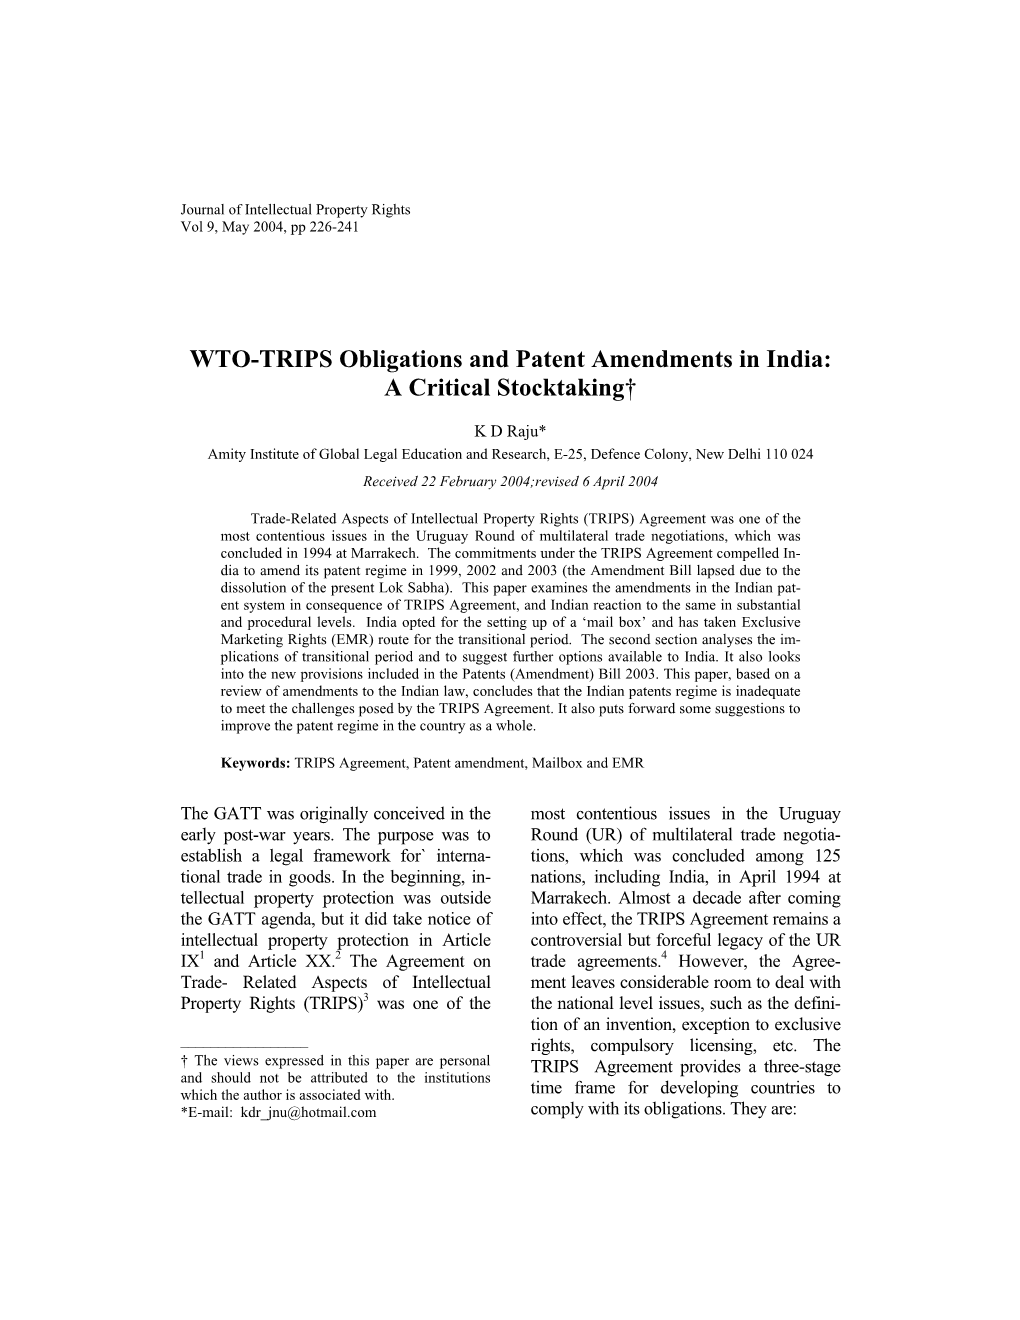 WTO-TRIPS Obligations and Patent Amendments in India: a Critical Stocktaking†